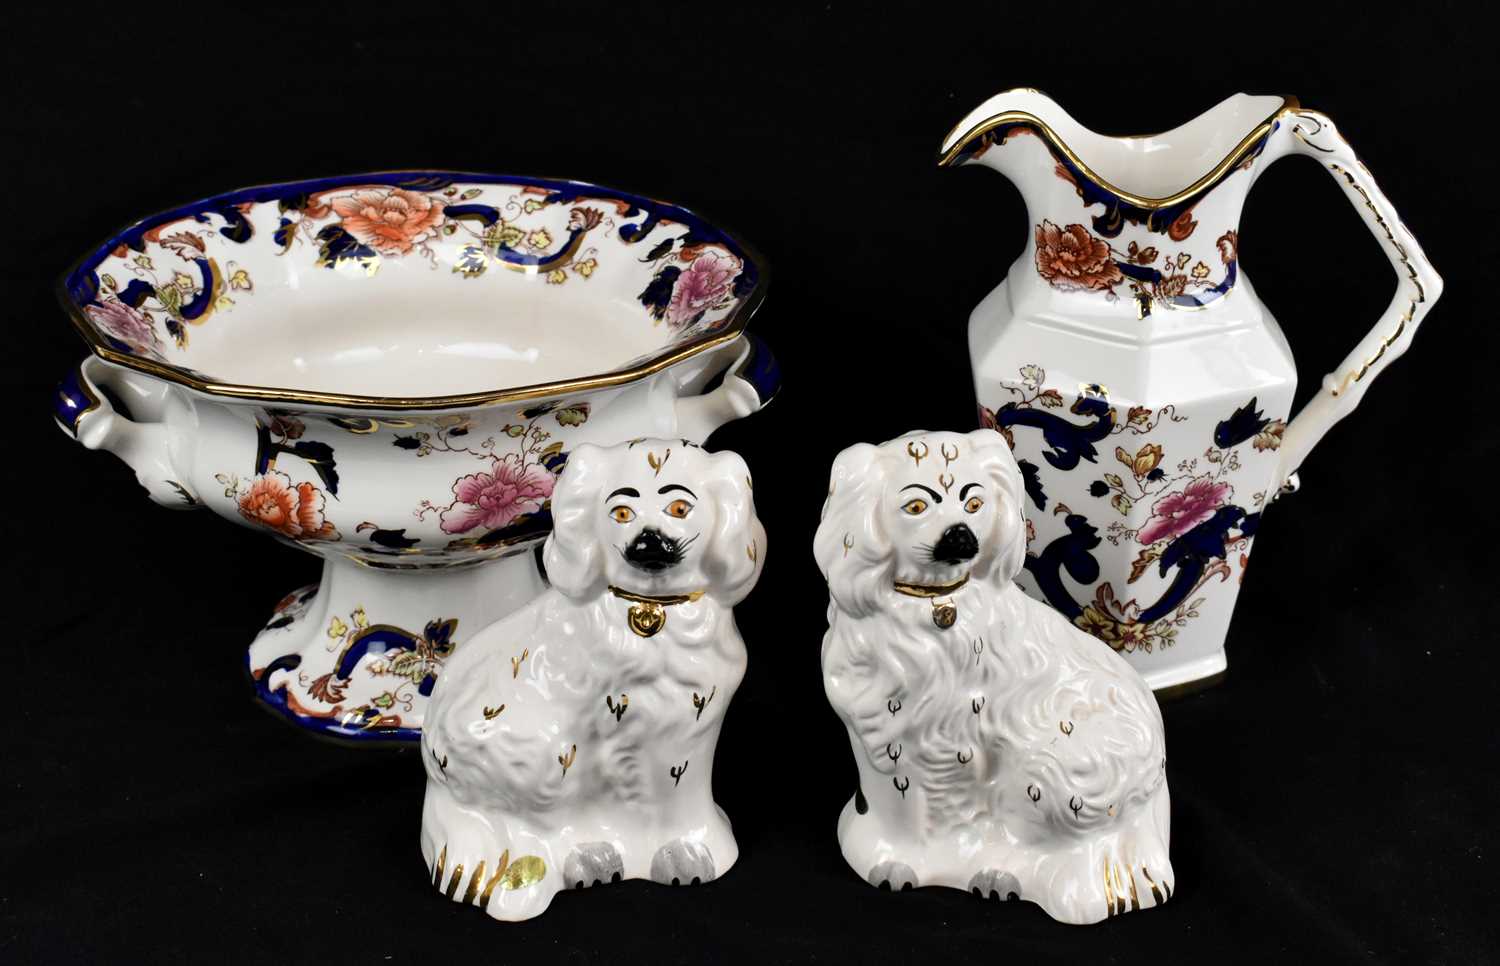 MASONS; a 'Regency' pattern twin handled fruit bowl and jug, with a pair of Staffordshire